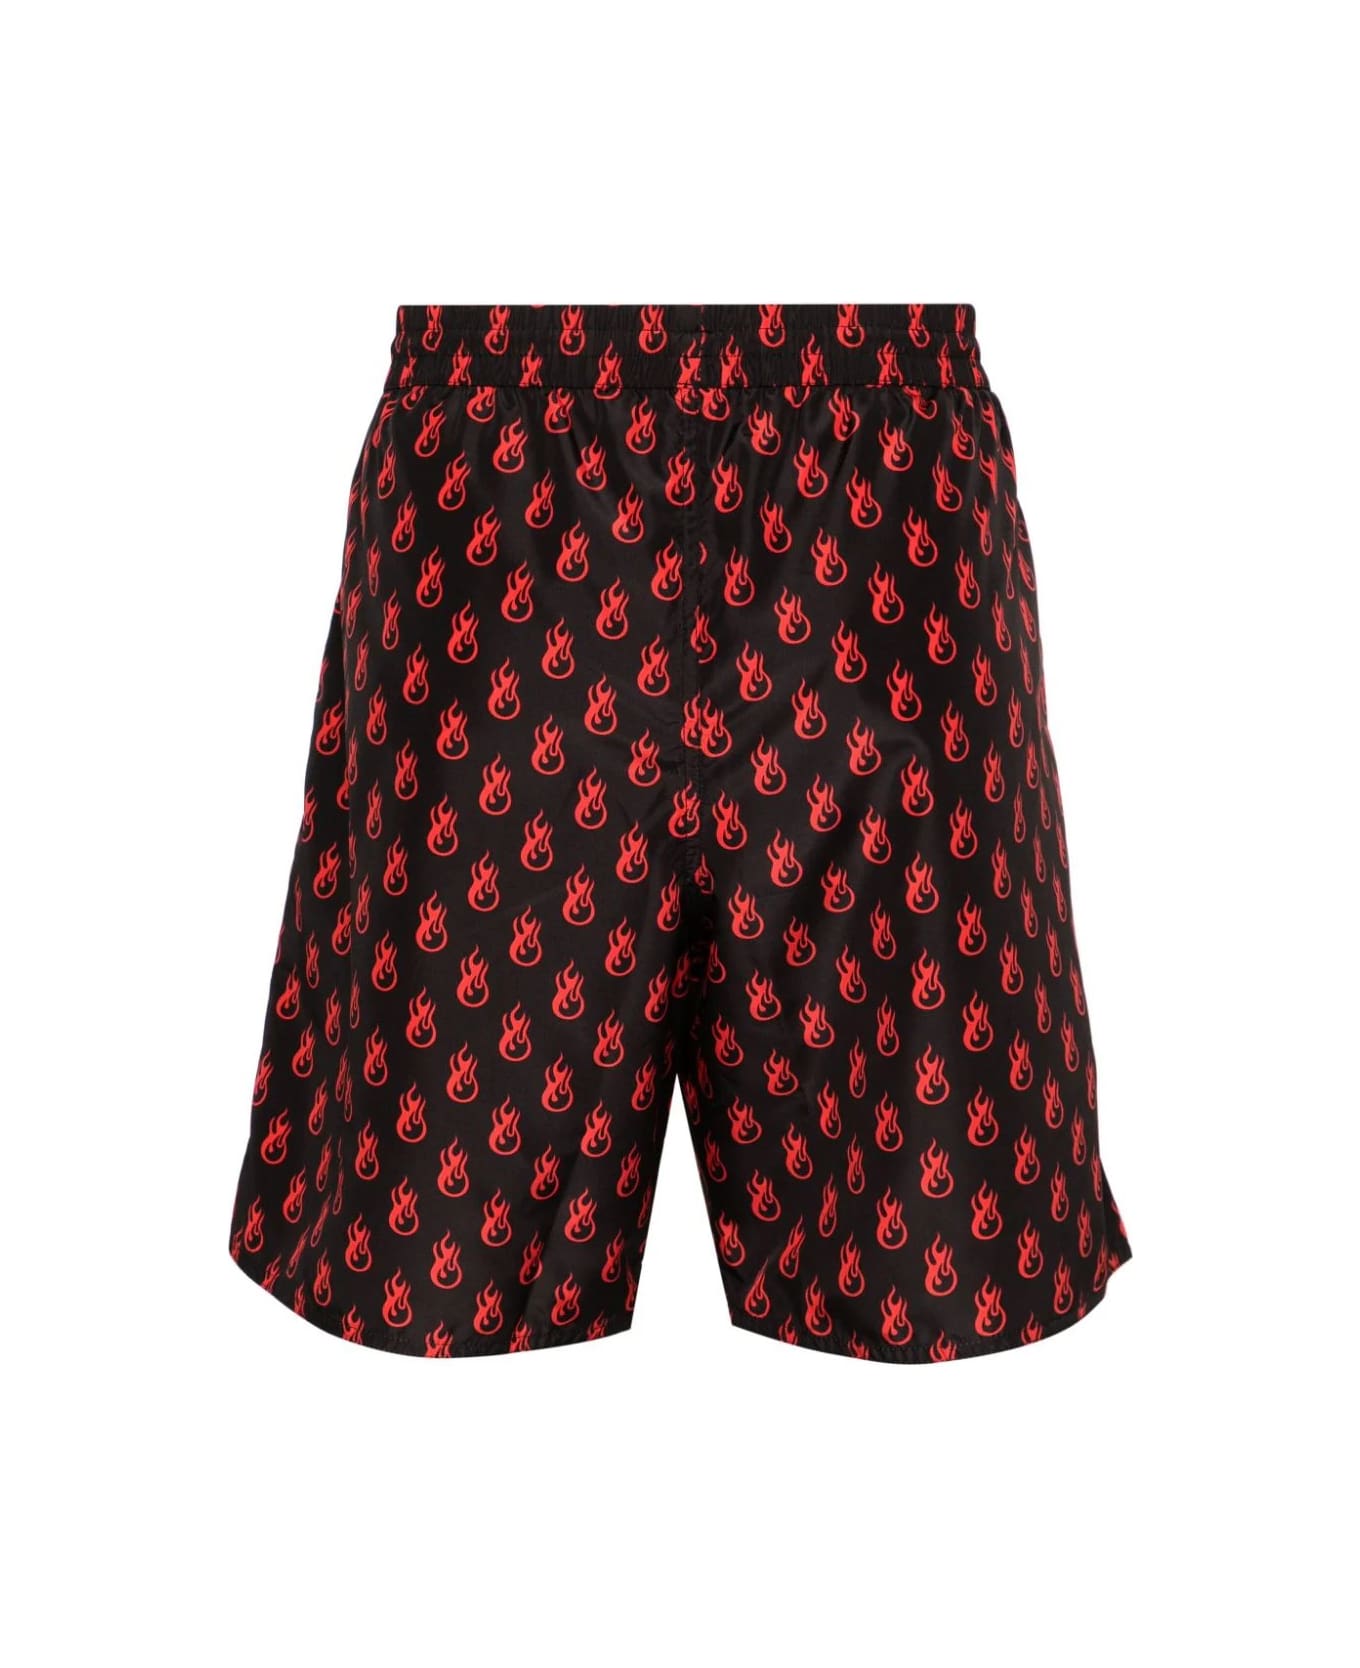 Vision of Super Black Swimwear With Red Flames Pattern - BLACK/RED